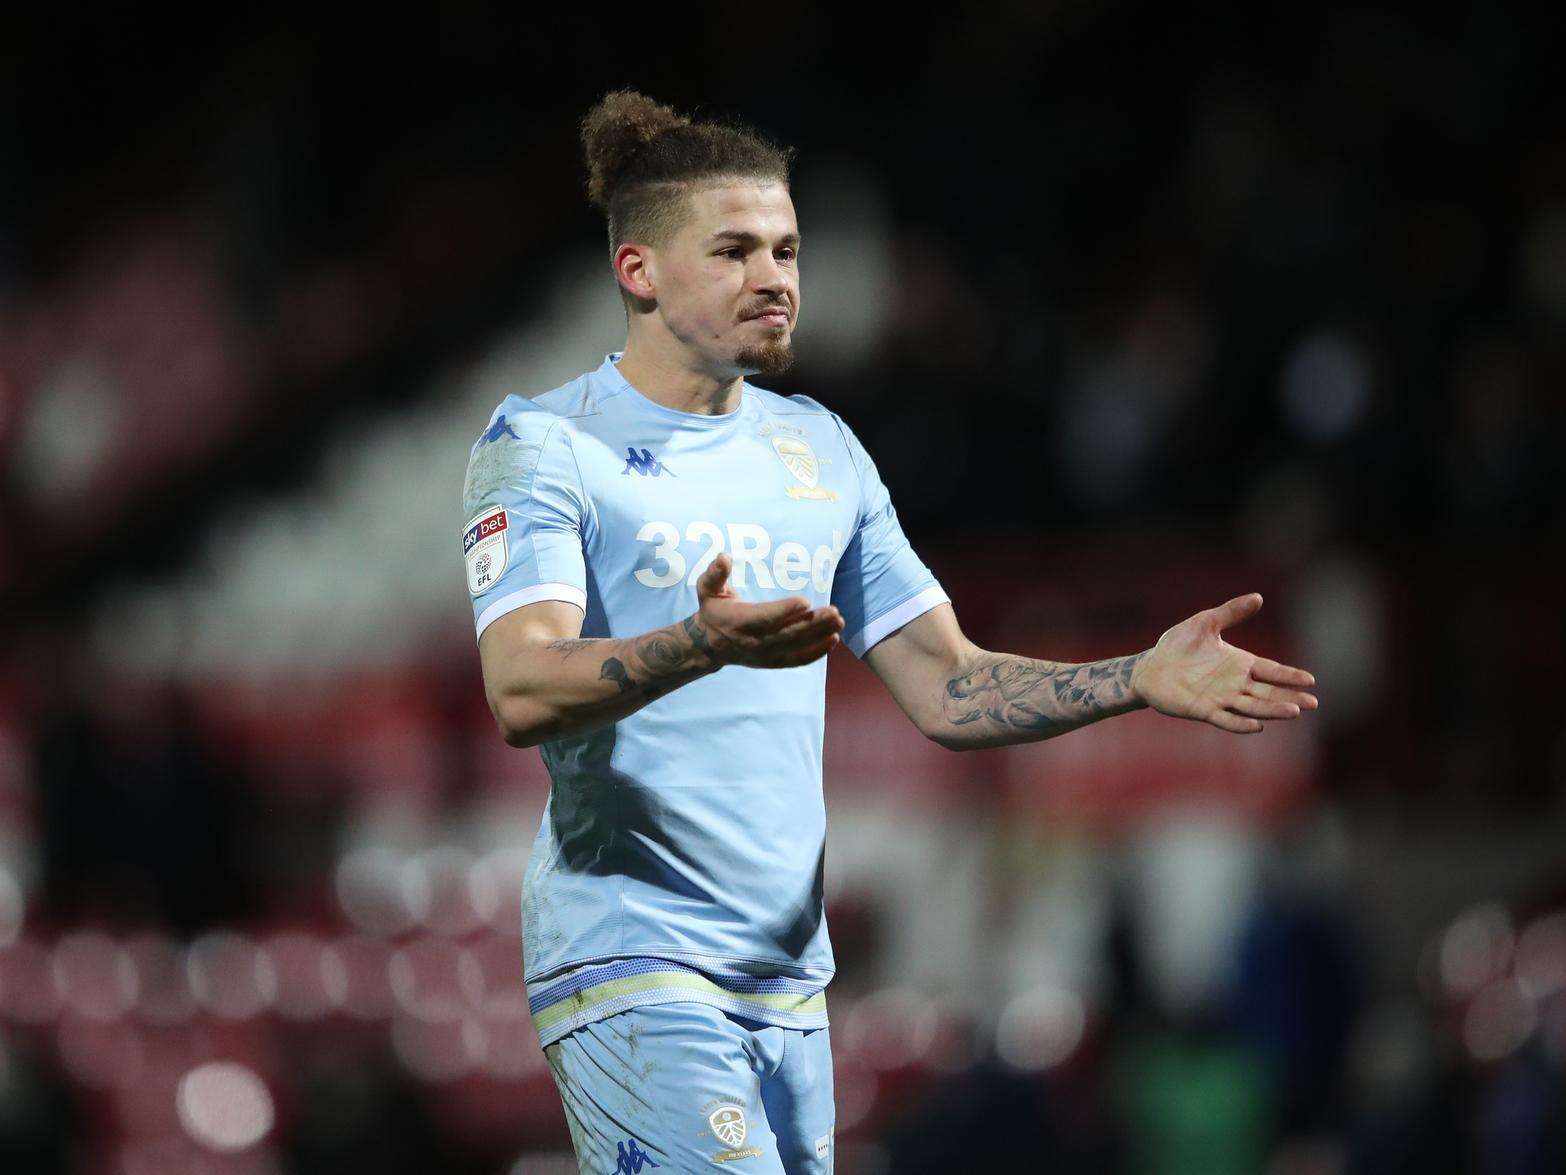 Football pundit Danny Mills has claimed that Leeds United's Kalvin Phillips has enough quality to play for England, and suggested he'd be in the Euro 2020 squad if he was a top tier footballer. (Football Insider)